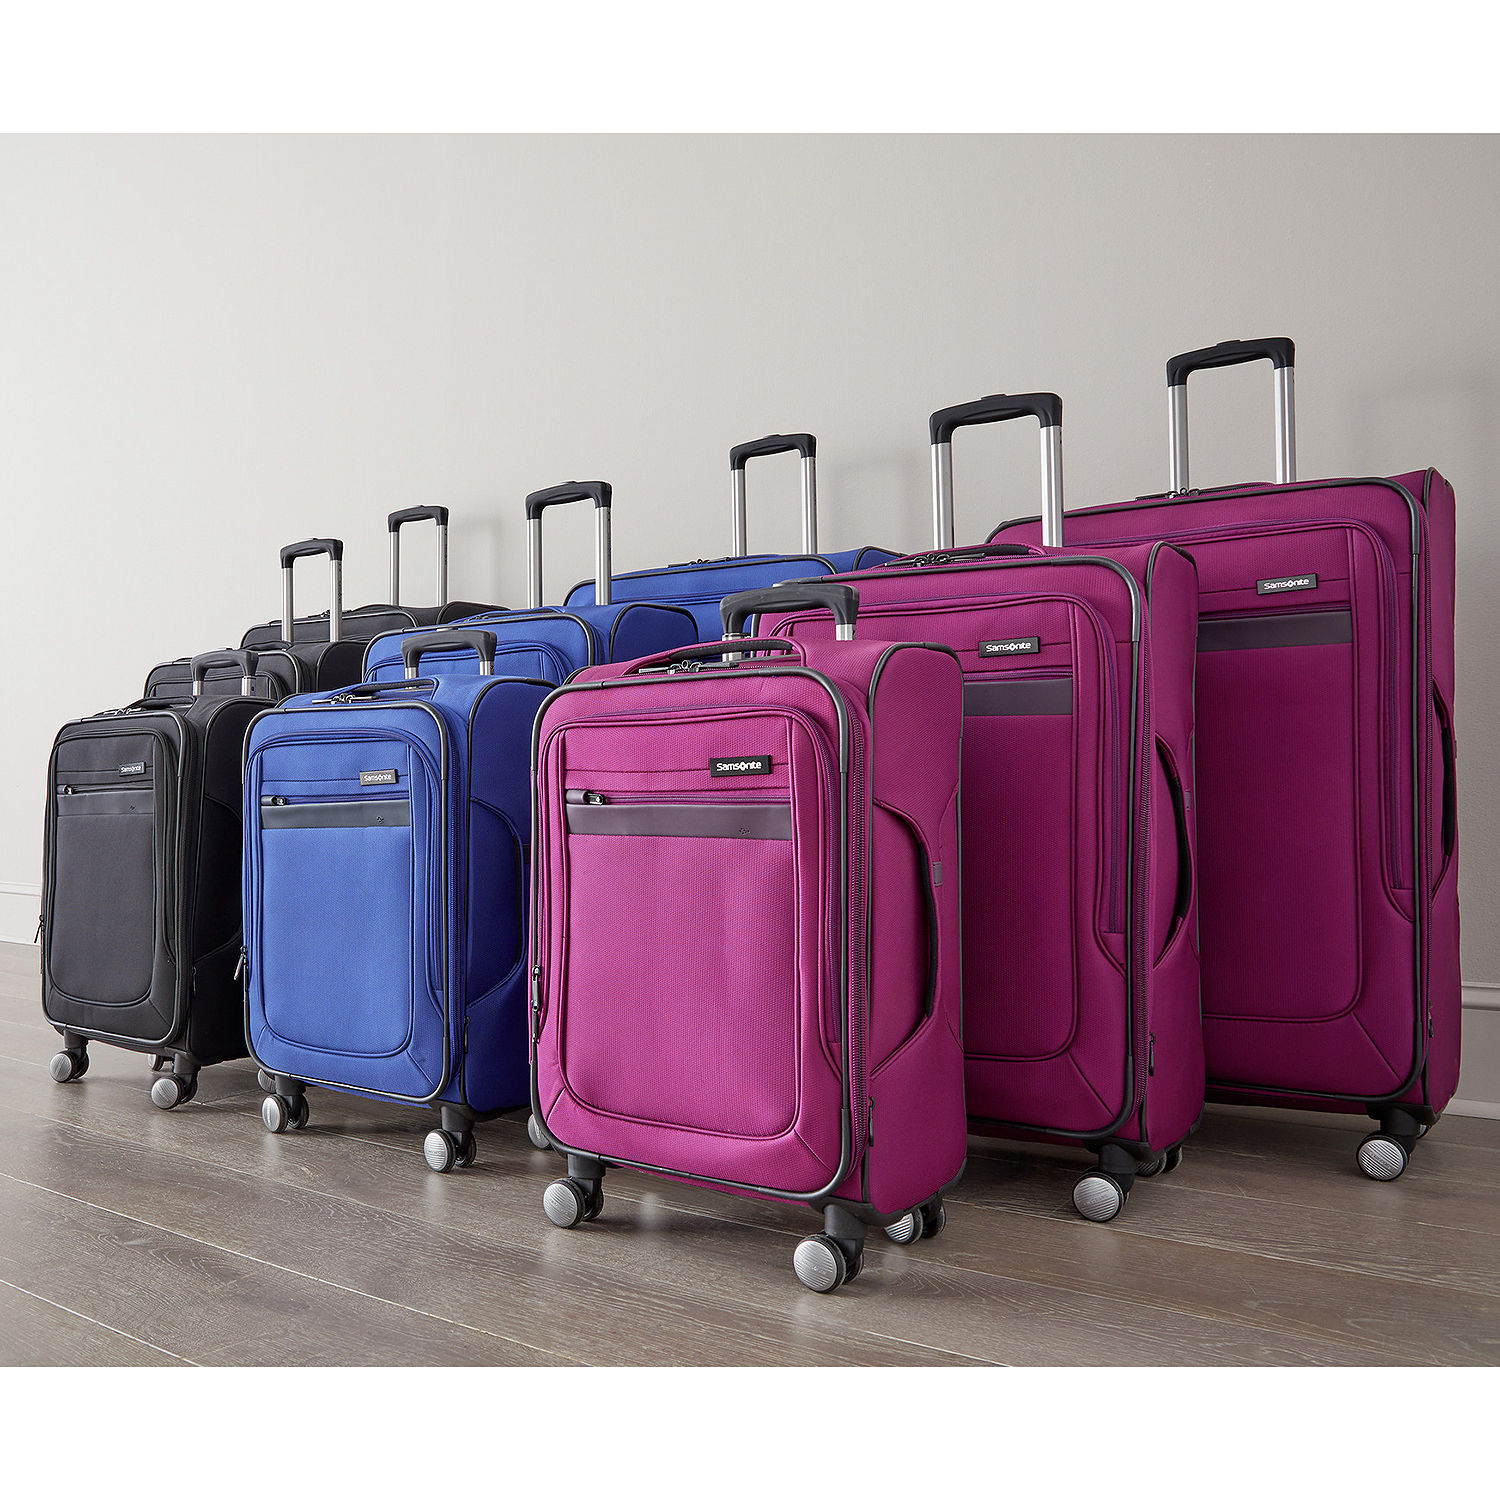 Samsonite 145720-0609 Ascella 3.0 Softside Collection - JCPenney